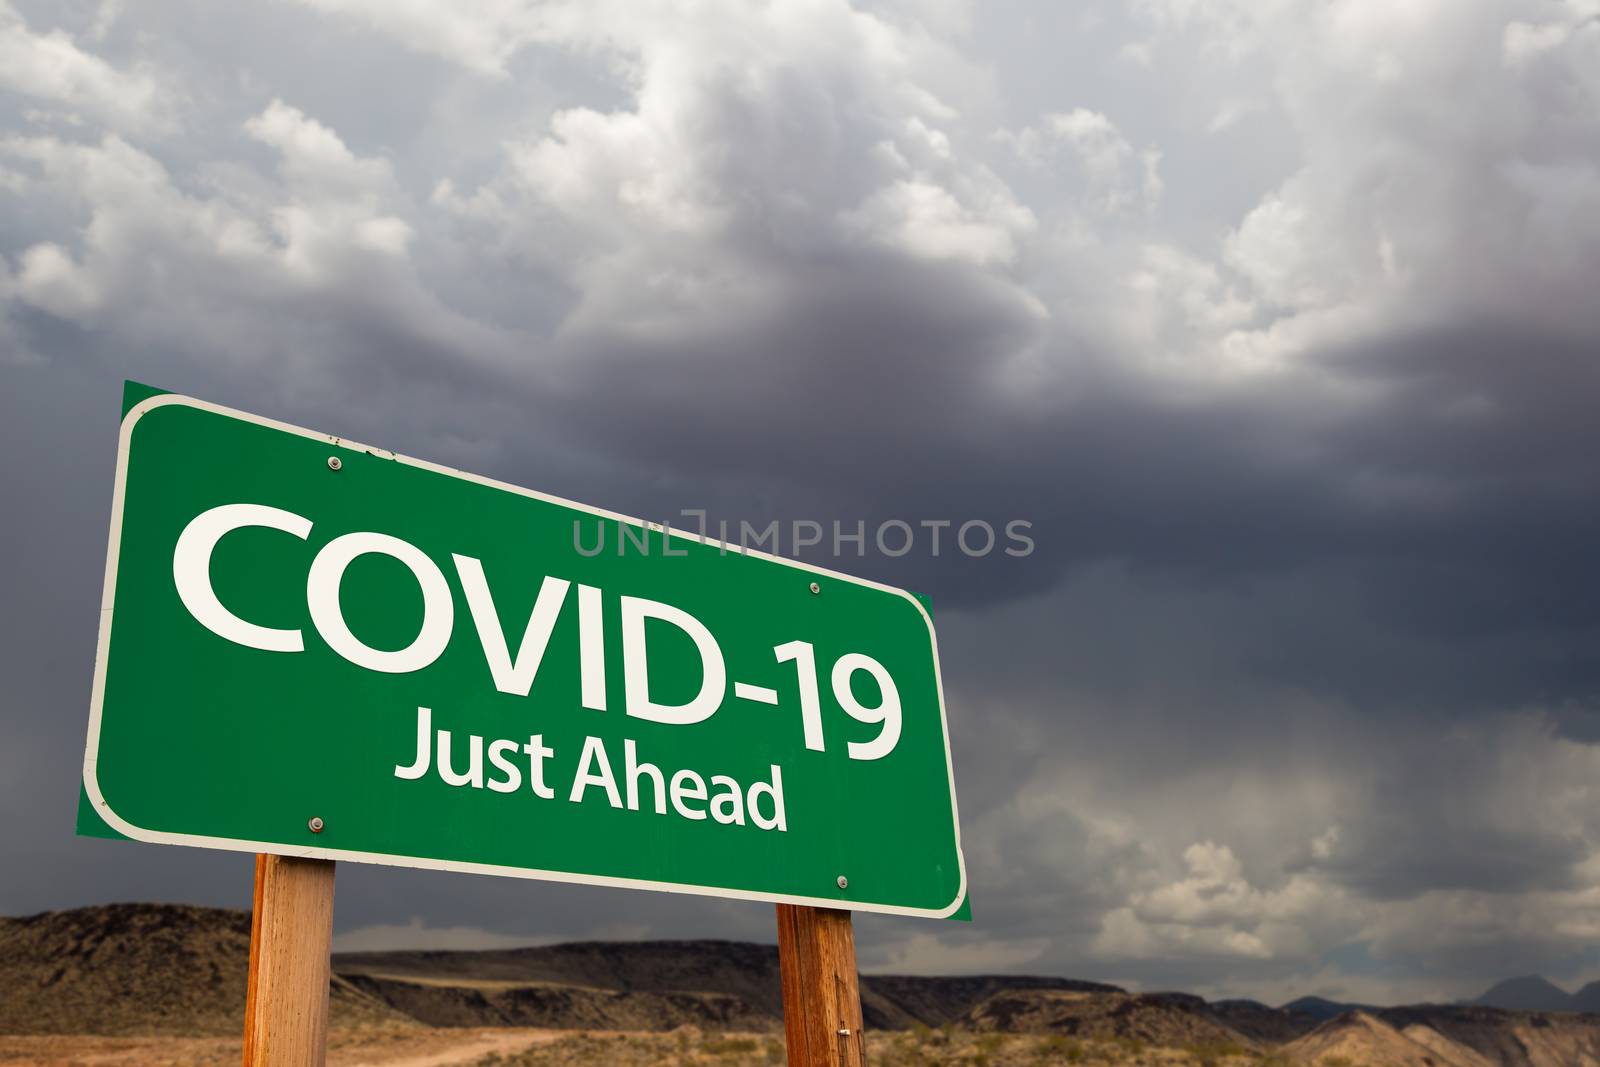 COVID-19 Coronavirus Green Road Sign Against Ominous Stormy Clou by Feverpitched